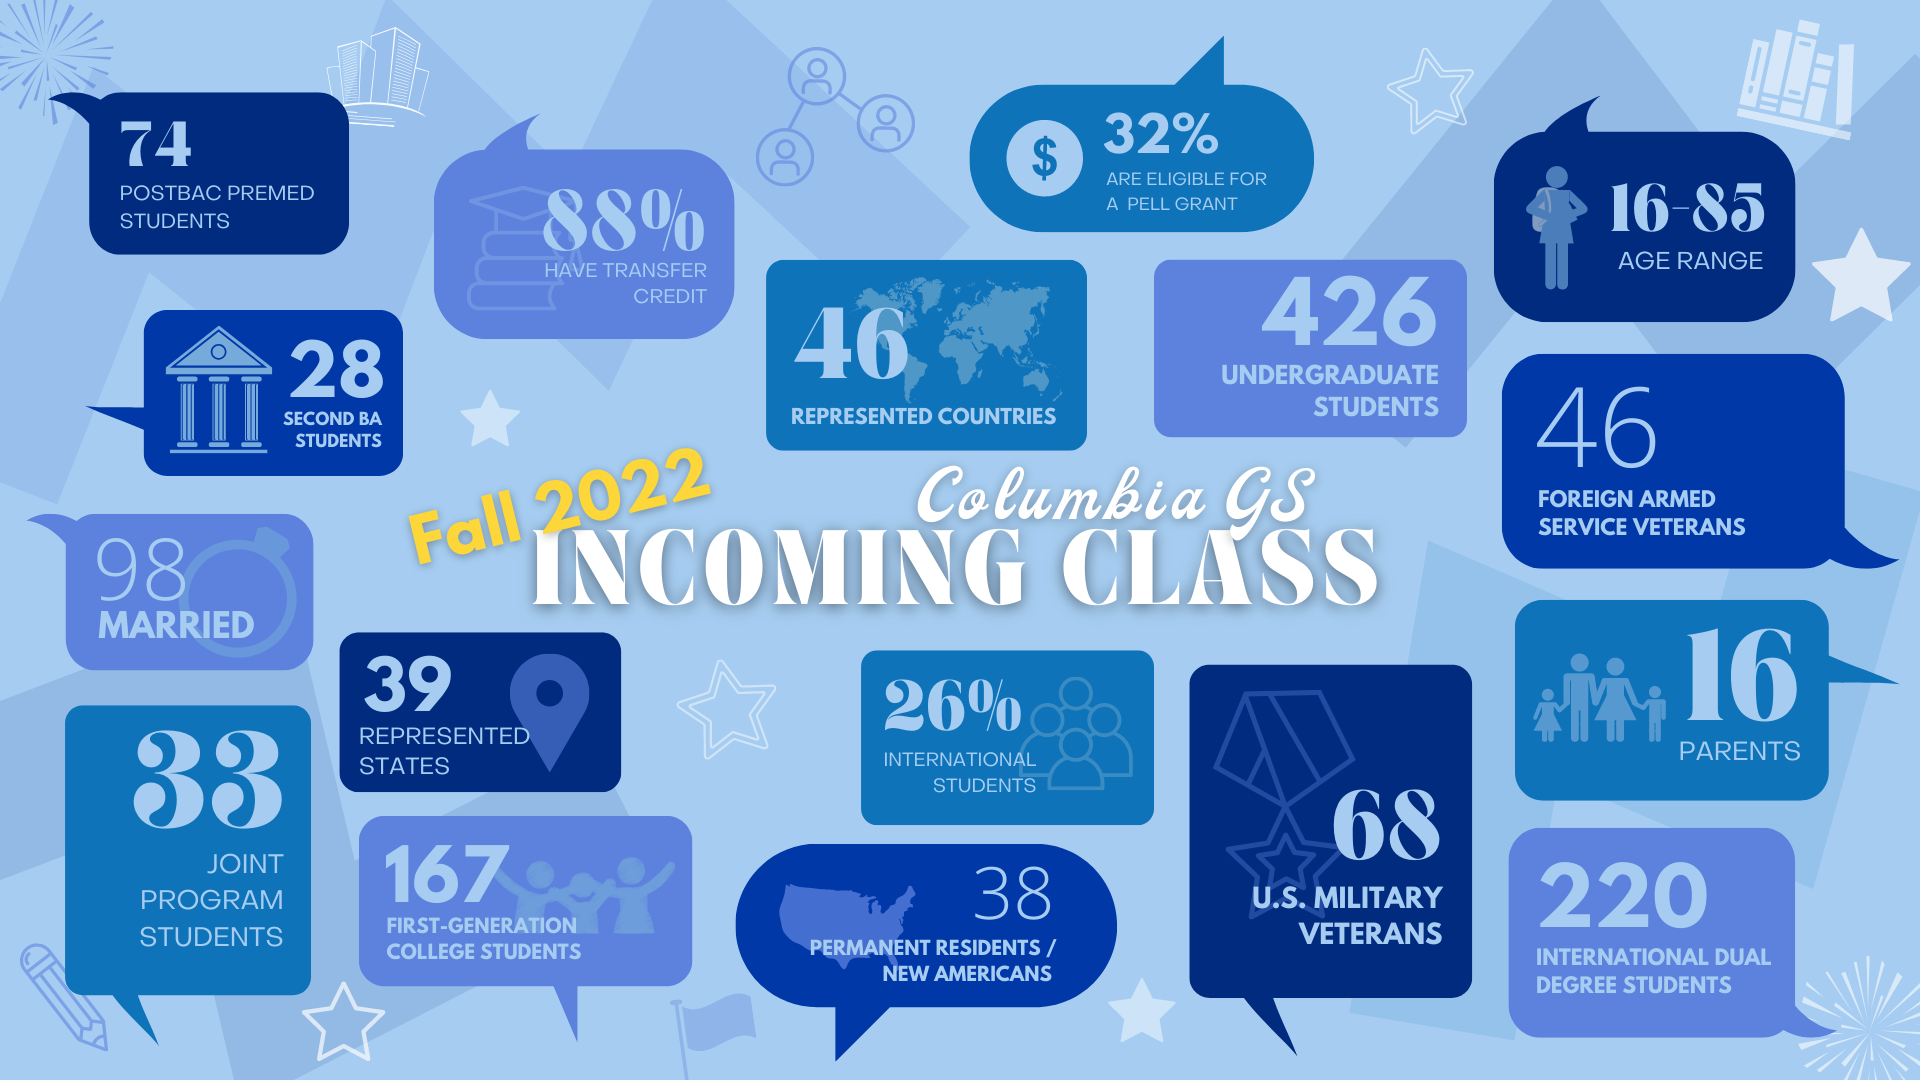 Infographic representing data about the Columbia GS Fall 2022 incoming class